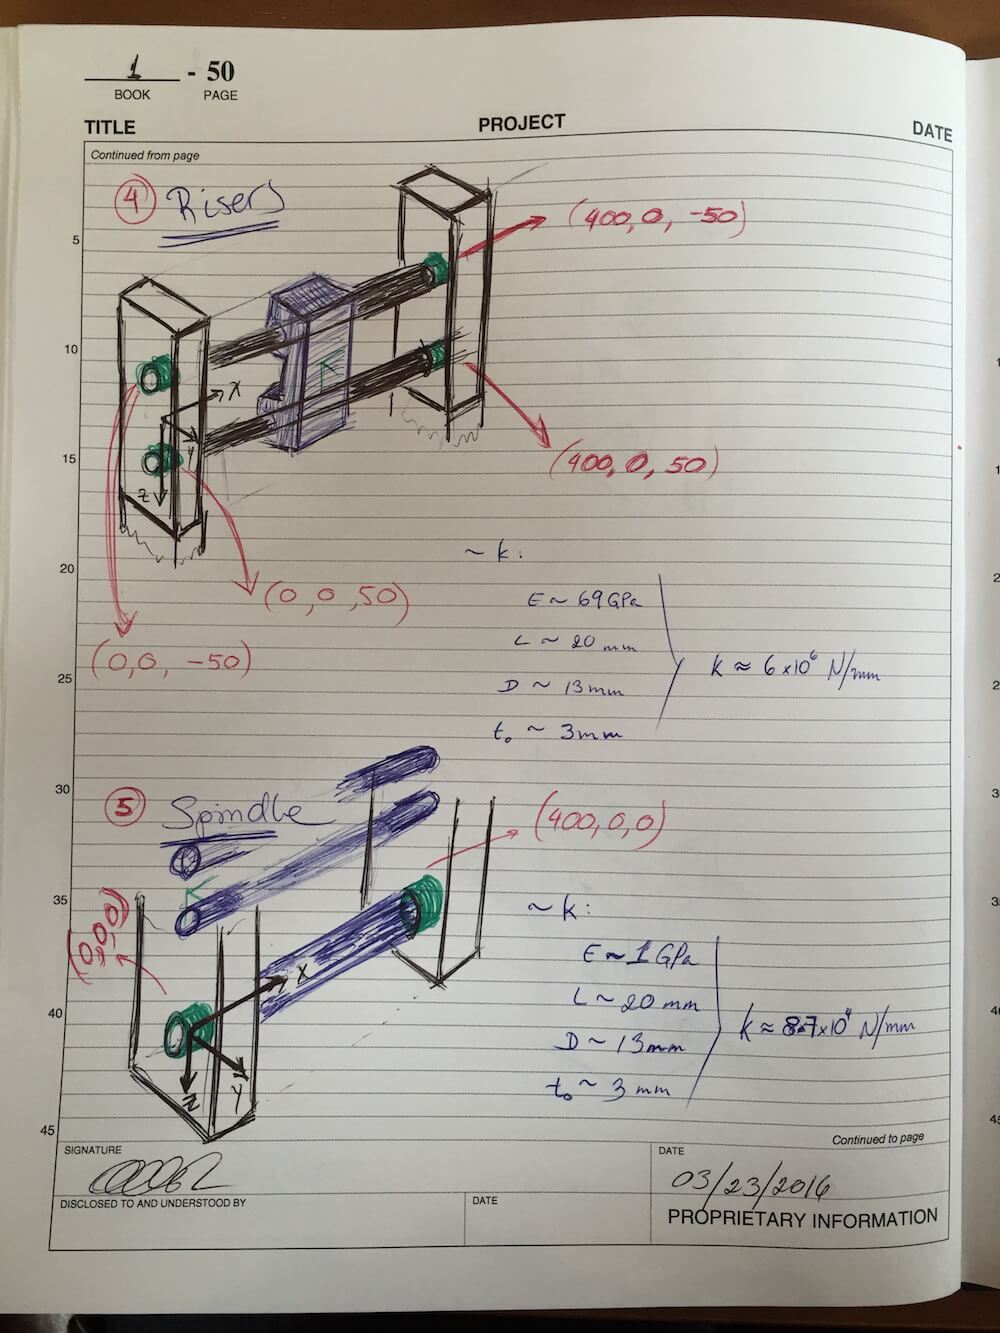 Review of Coordinate Systems - Risers View and Spindle View